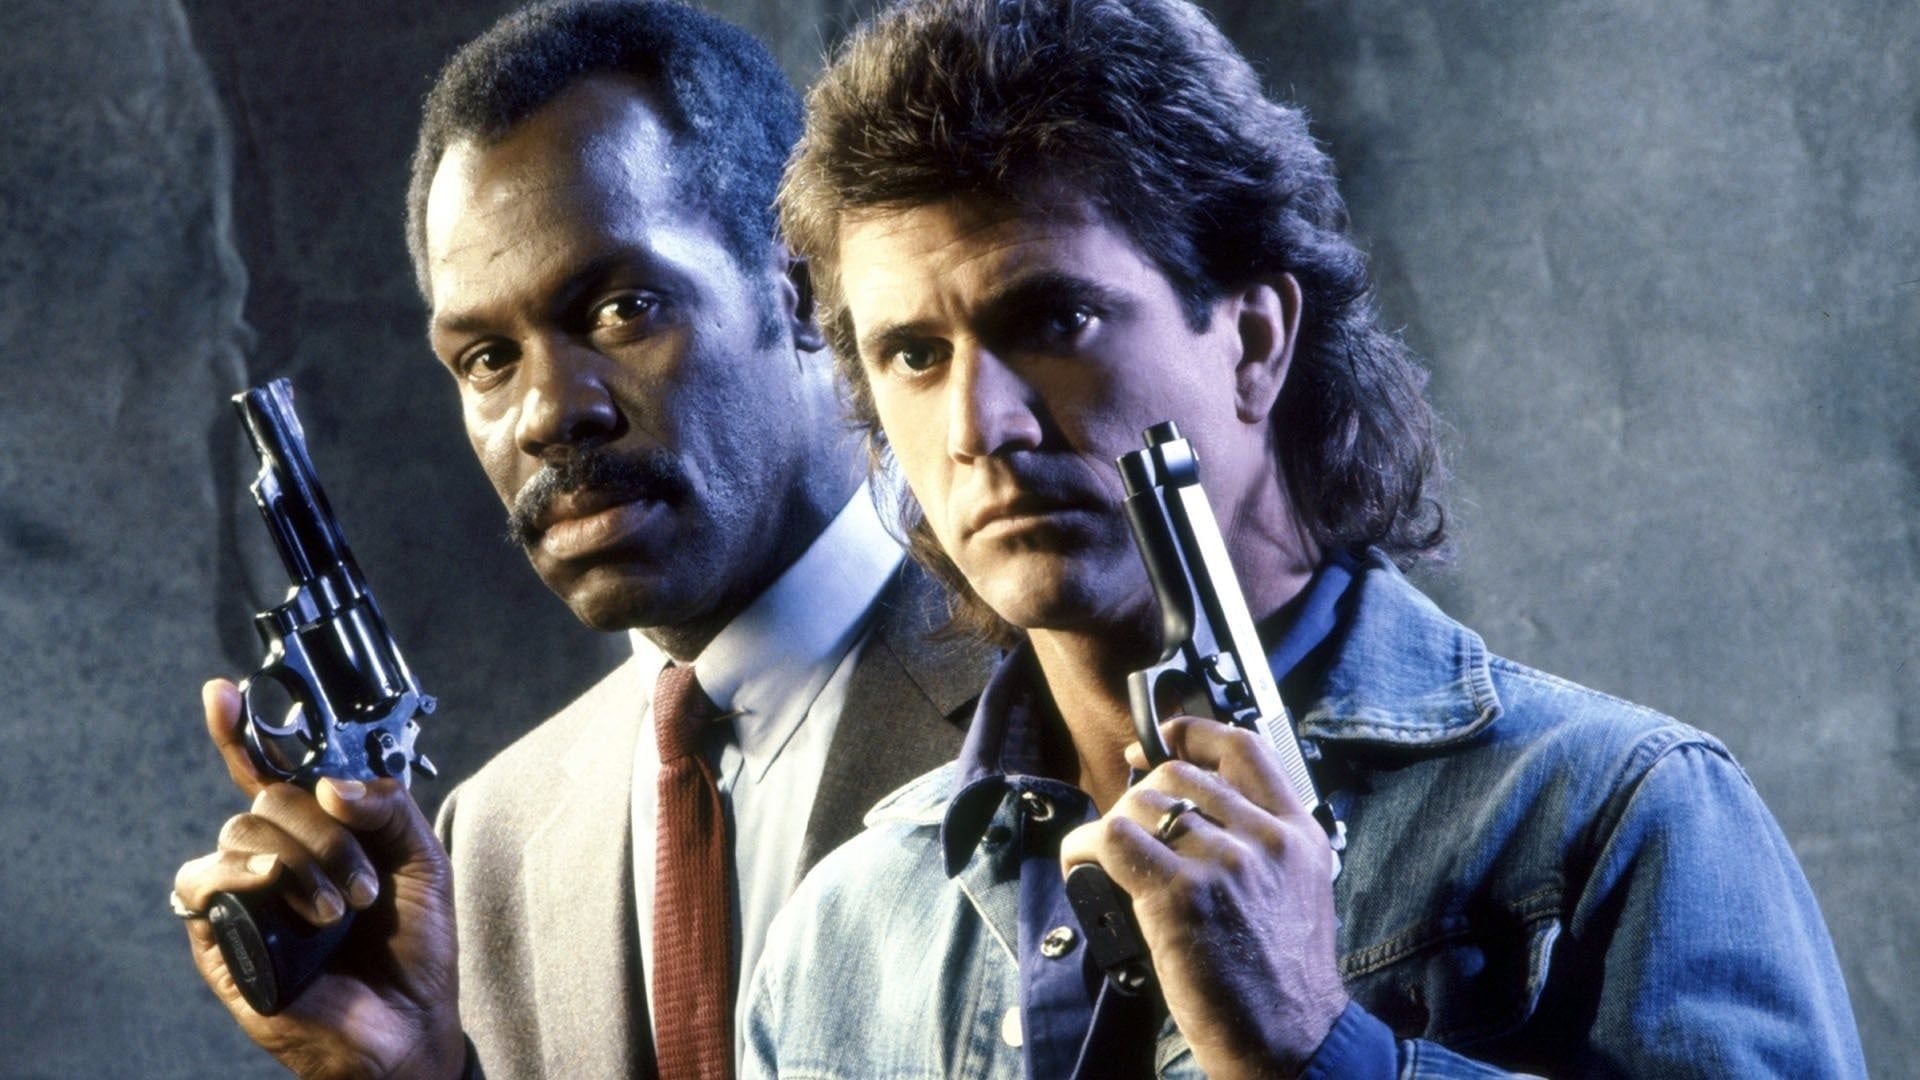 HD wallpaper, Hbo Max, 1987, Lethal Weapon, Movies, Desktop Full Hd Lethal Weapon 1987 Wallpaper, 1920X1080 Full Hd Desktop